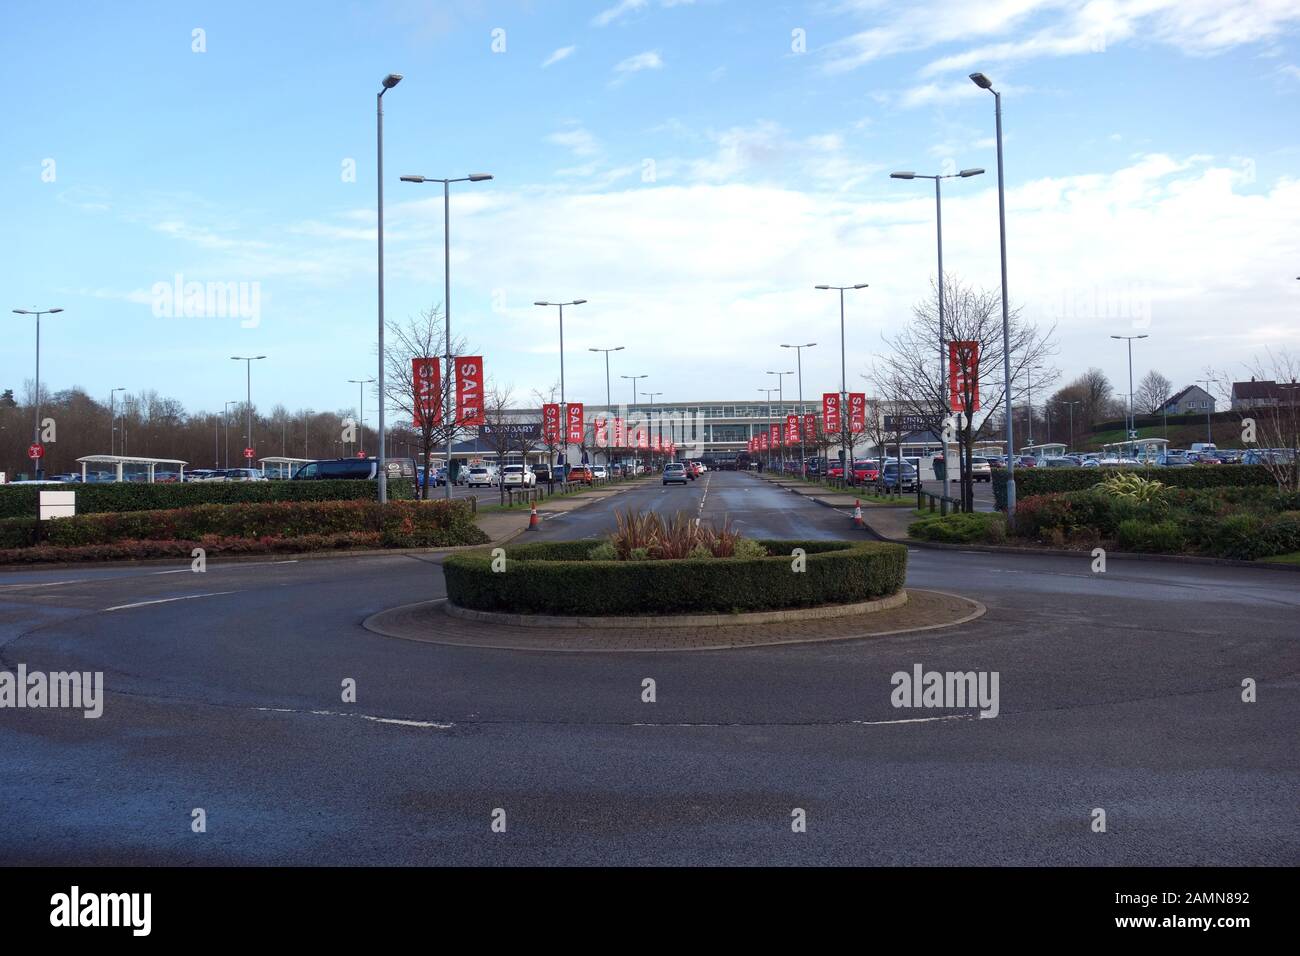 The Car Park Outside Boundary Mills Retail Shopping Outlet in Colne, Pendle, Lancashire, England, UK. Stock Photo